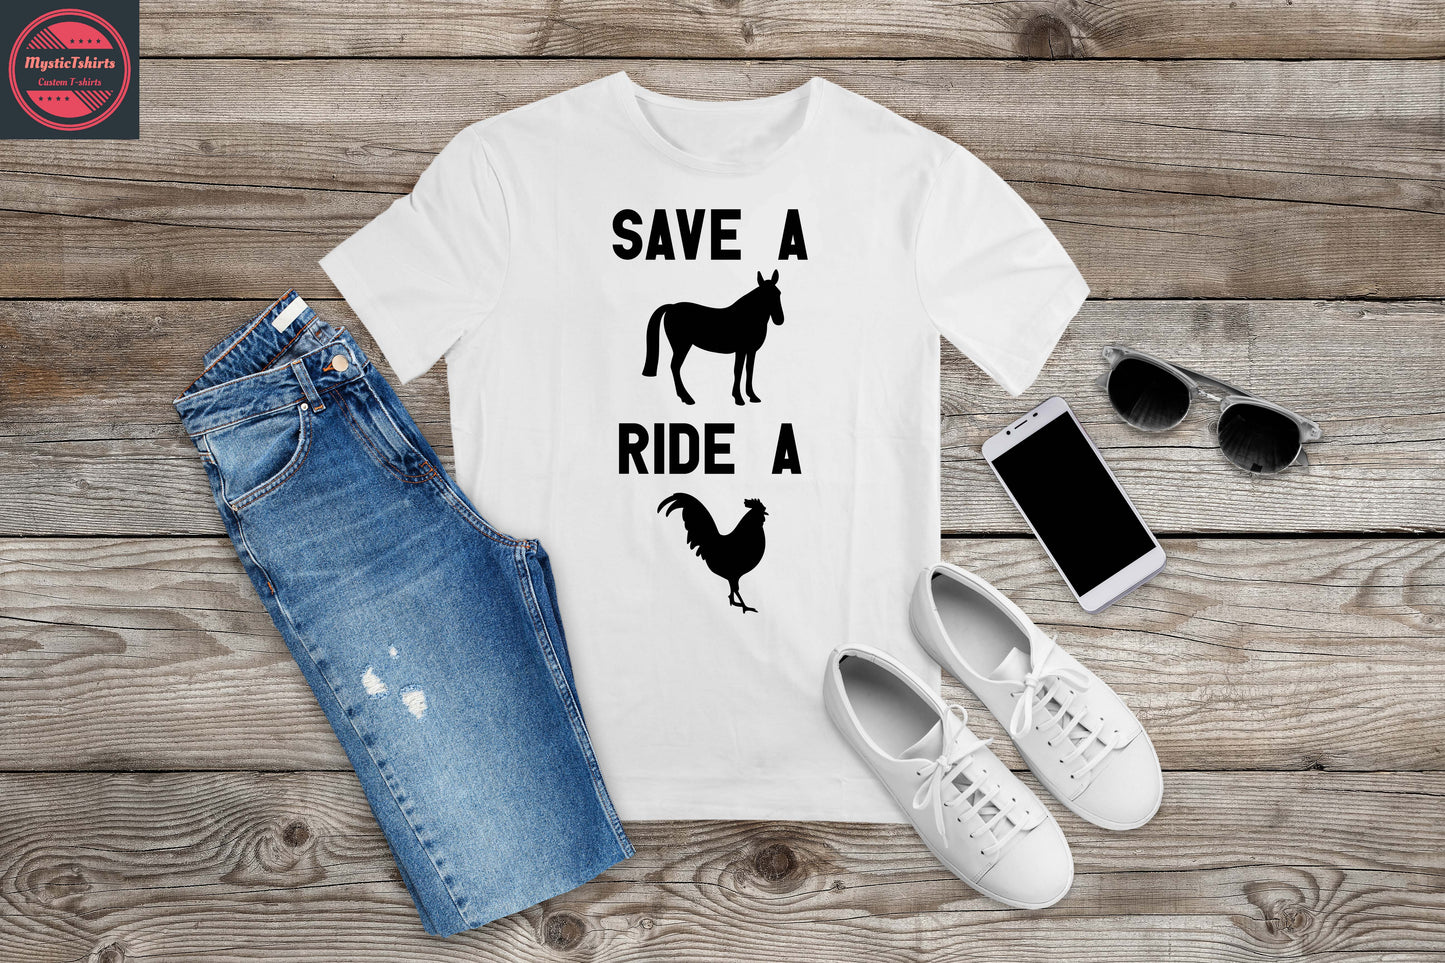 416. SAVE A HORSE RIDE A COCK, Personalized T-Shirt, Custom Text, Make Your Own Shirt, Custom Tee